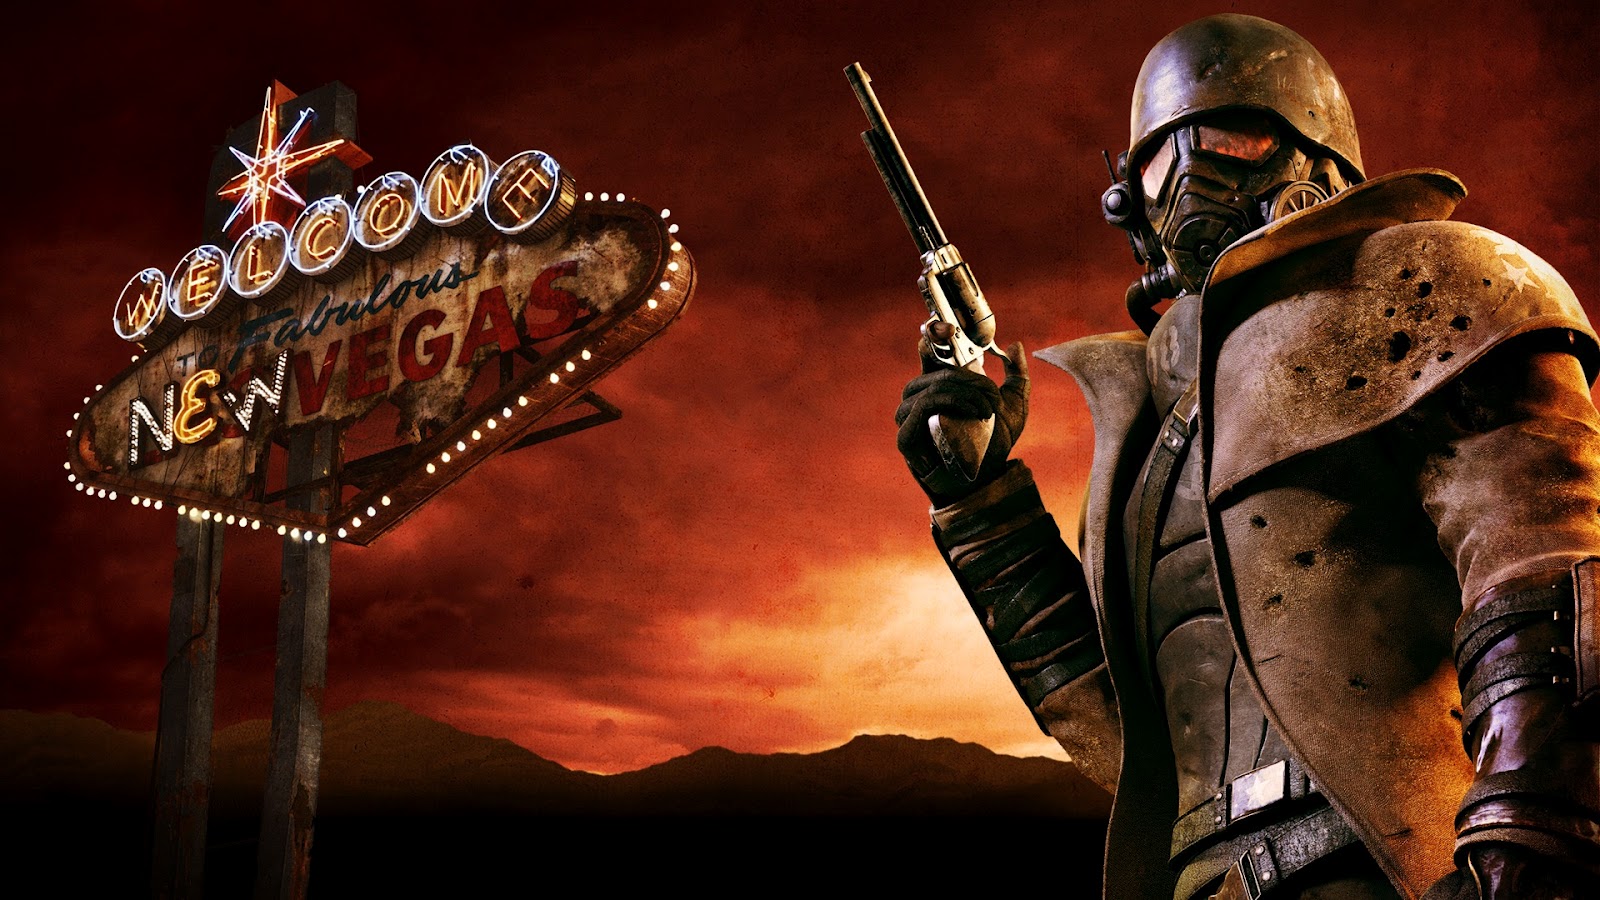 ‘Fallout: New Vegas’ Developer Promises Gambling on Microtransactions Will Be Absent From Their Next Game